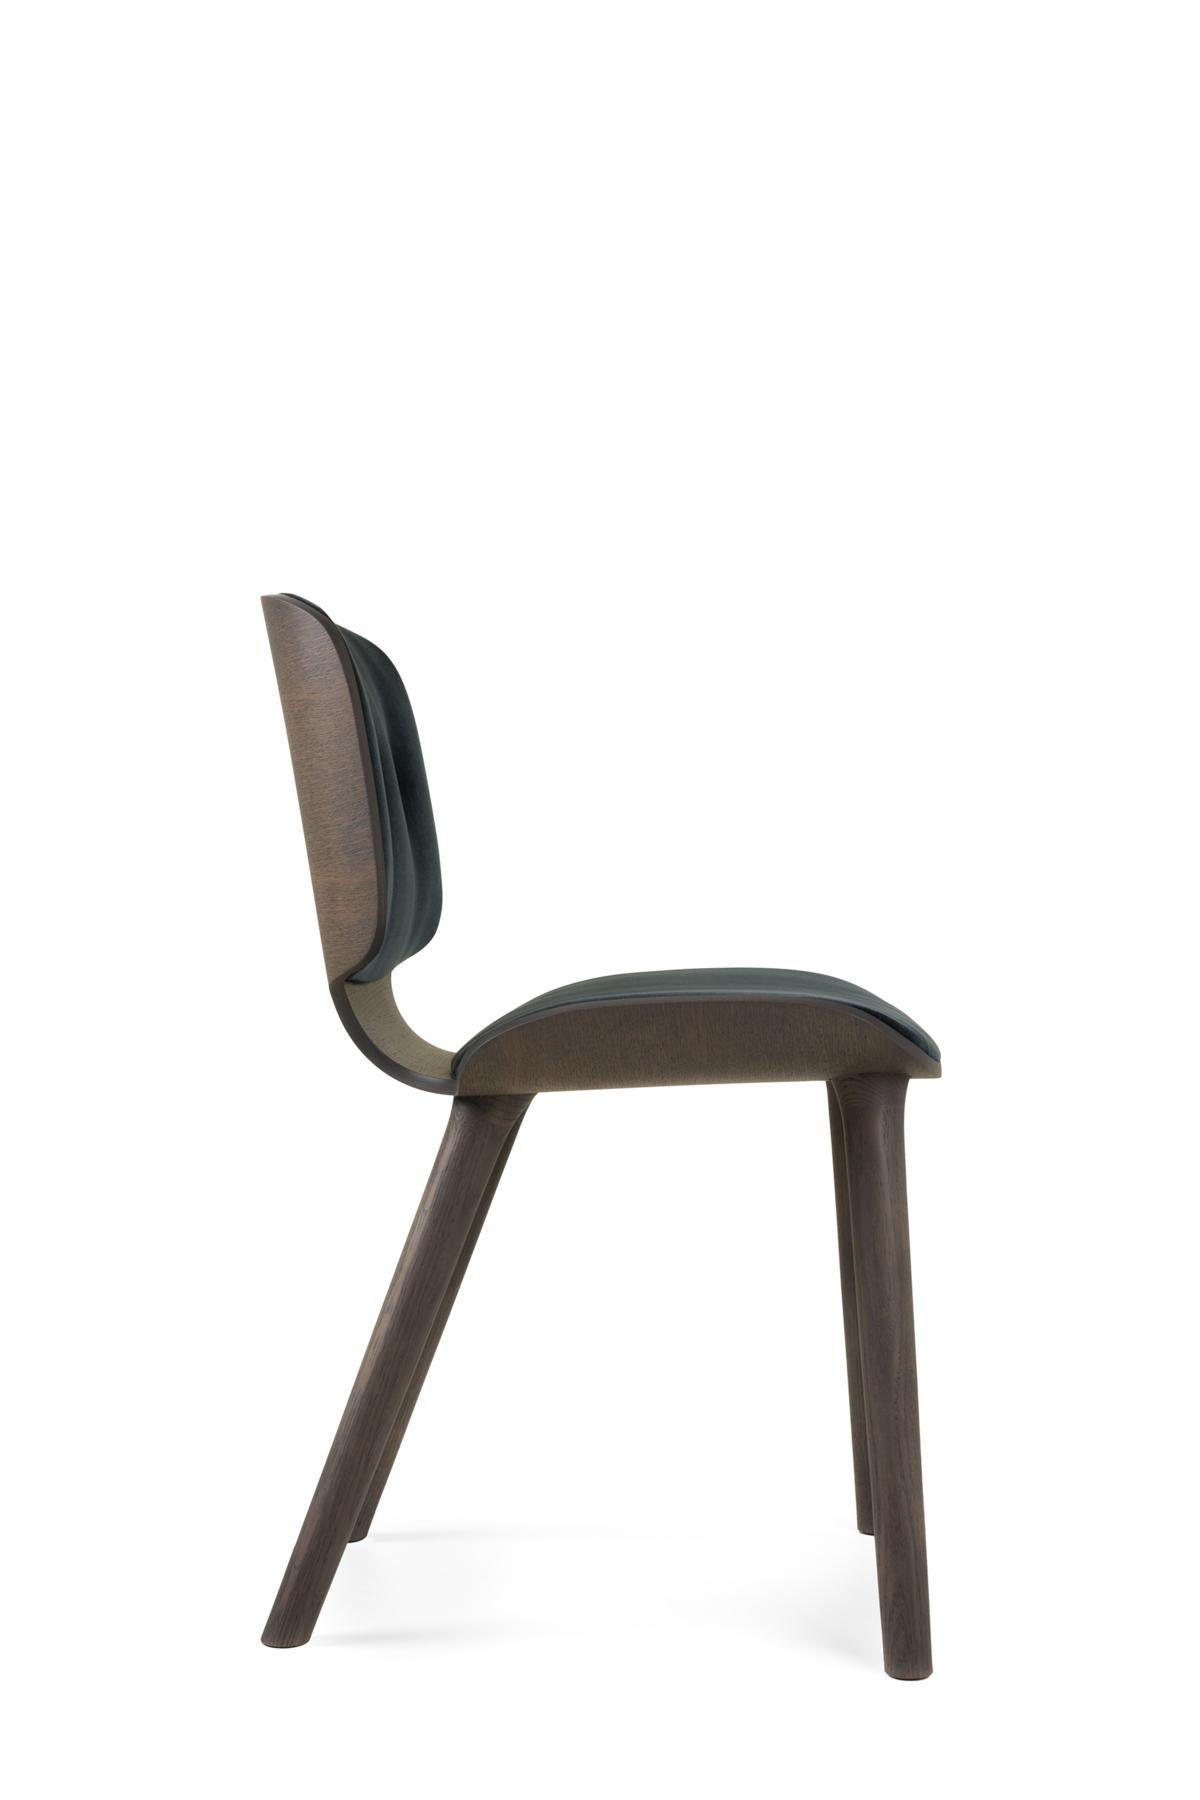 Dutch Moooi Nut Dining Chair in Grey Stained Oak & Harald 3, 182 Blue Upholstery For Sale